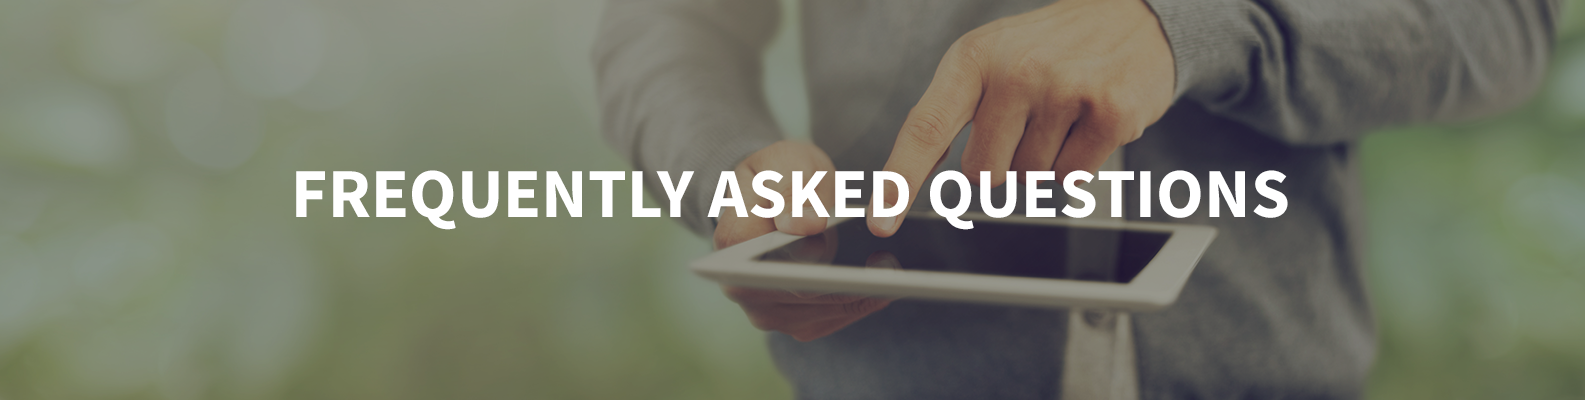 man's hand scrolling over ipad, text across image reads: frequently asked questions